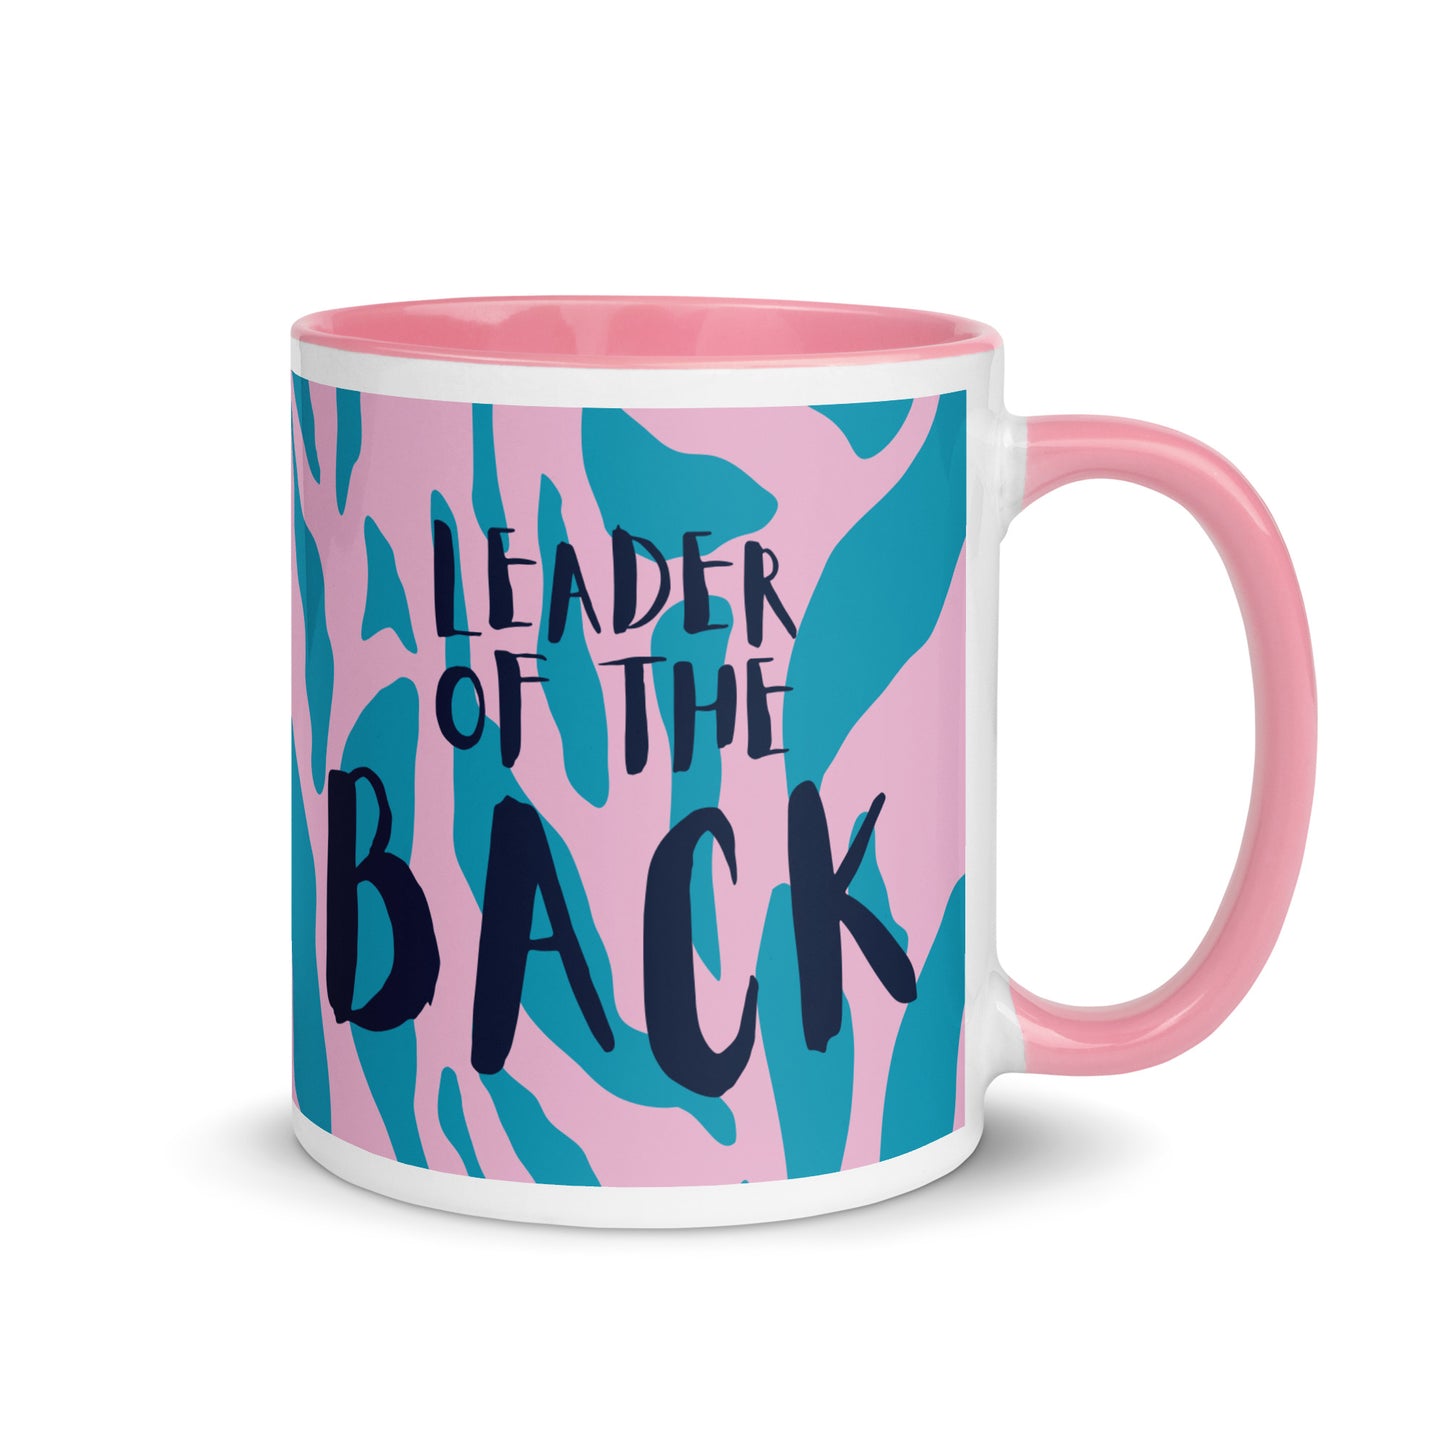 mug with blue and pink animal print, and pink handle with the phrase leader of the back across the front. a gift for slow runners